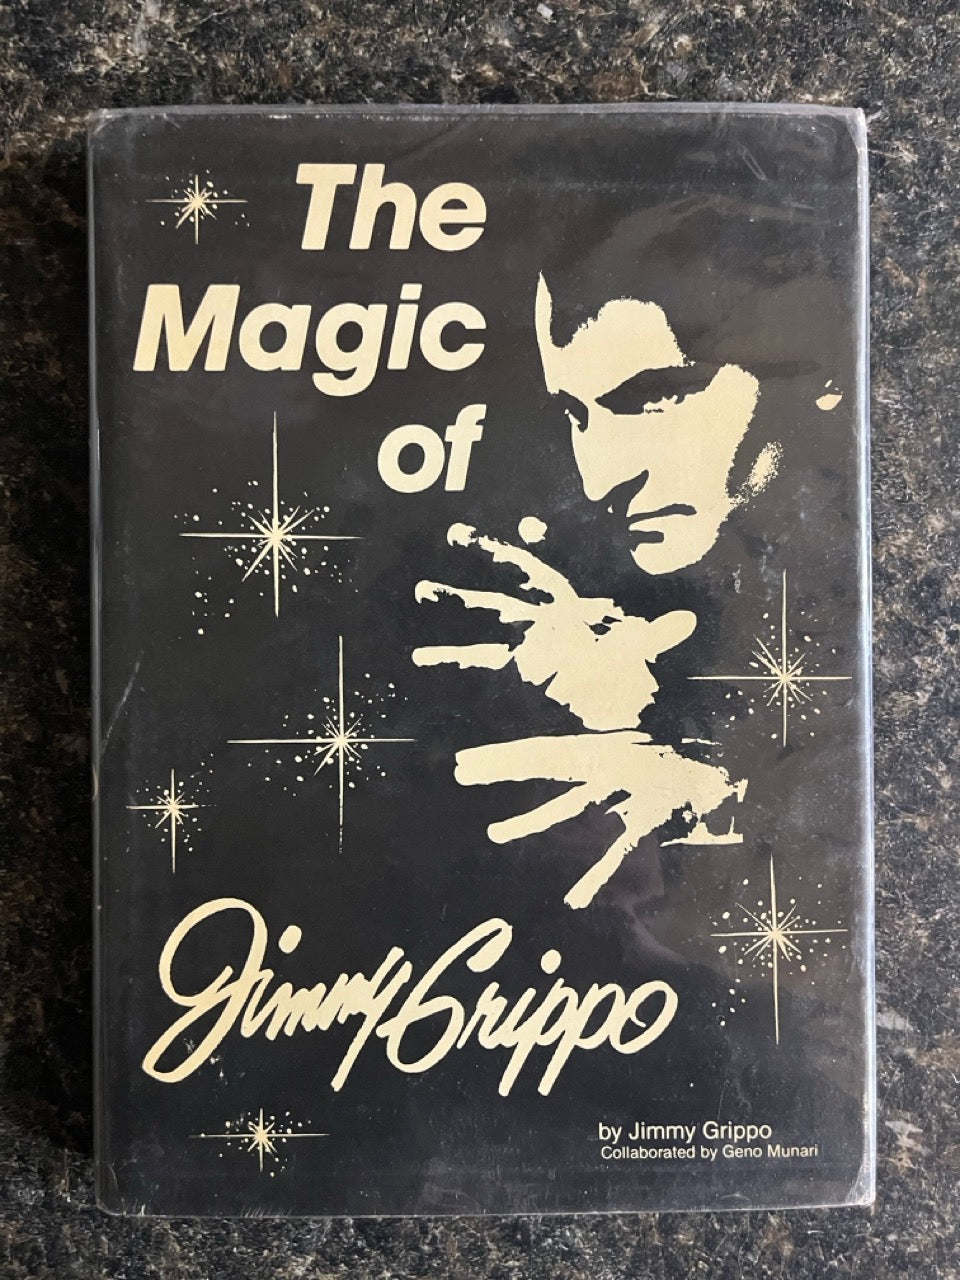 The Magic of Jimmy Grippo